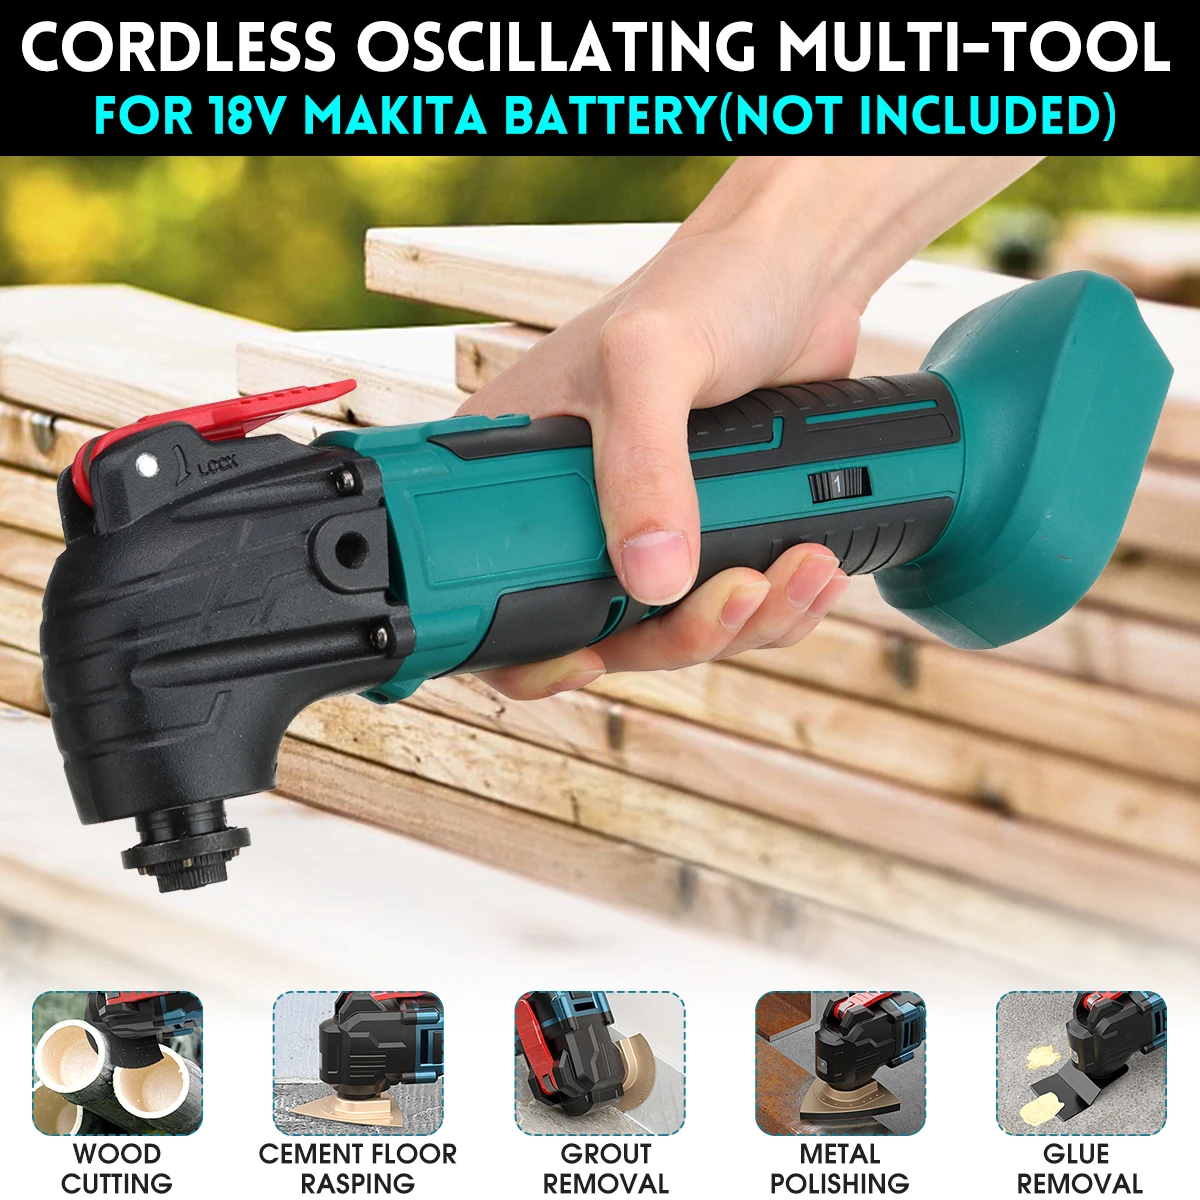 Hot Products! 6 Speeds Adjustable Cordless Oscillating Multi Tool Variable Speed Renovator Woodworking Tool For 18V Makita Battery 20000 RPM